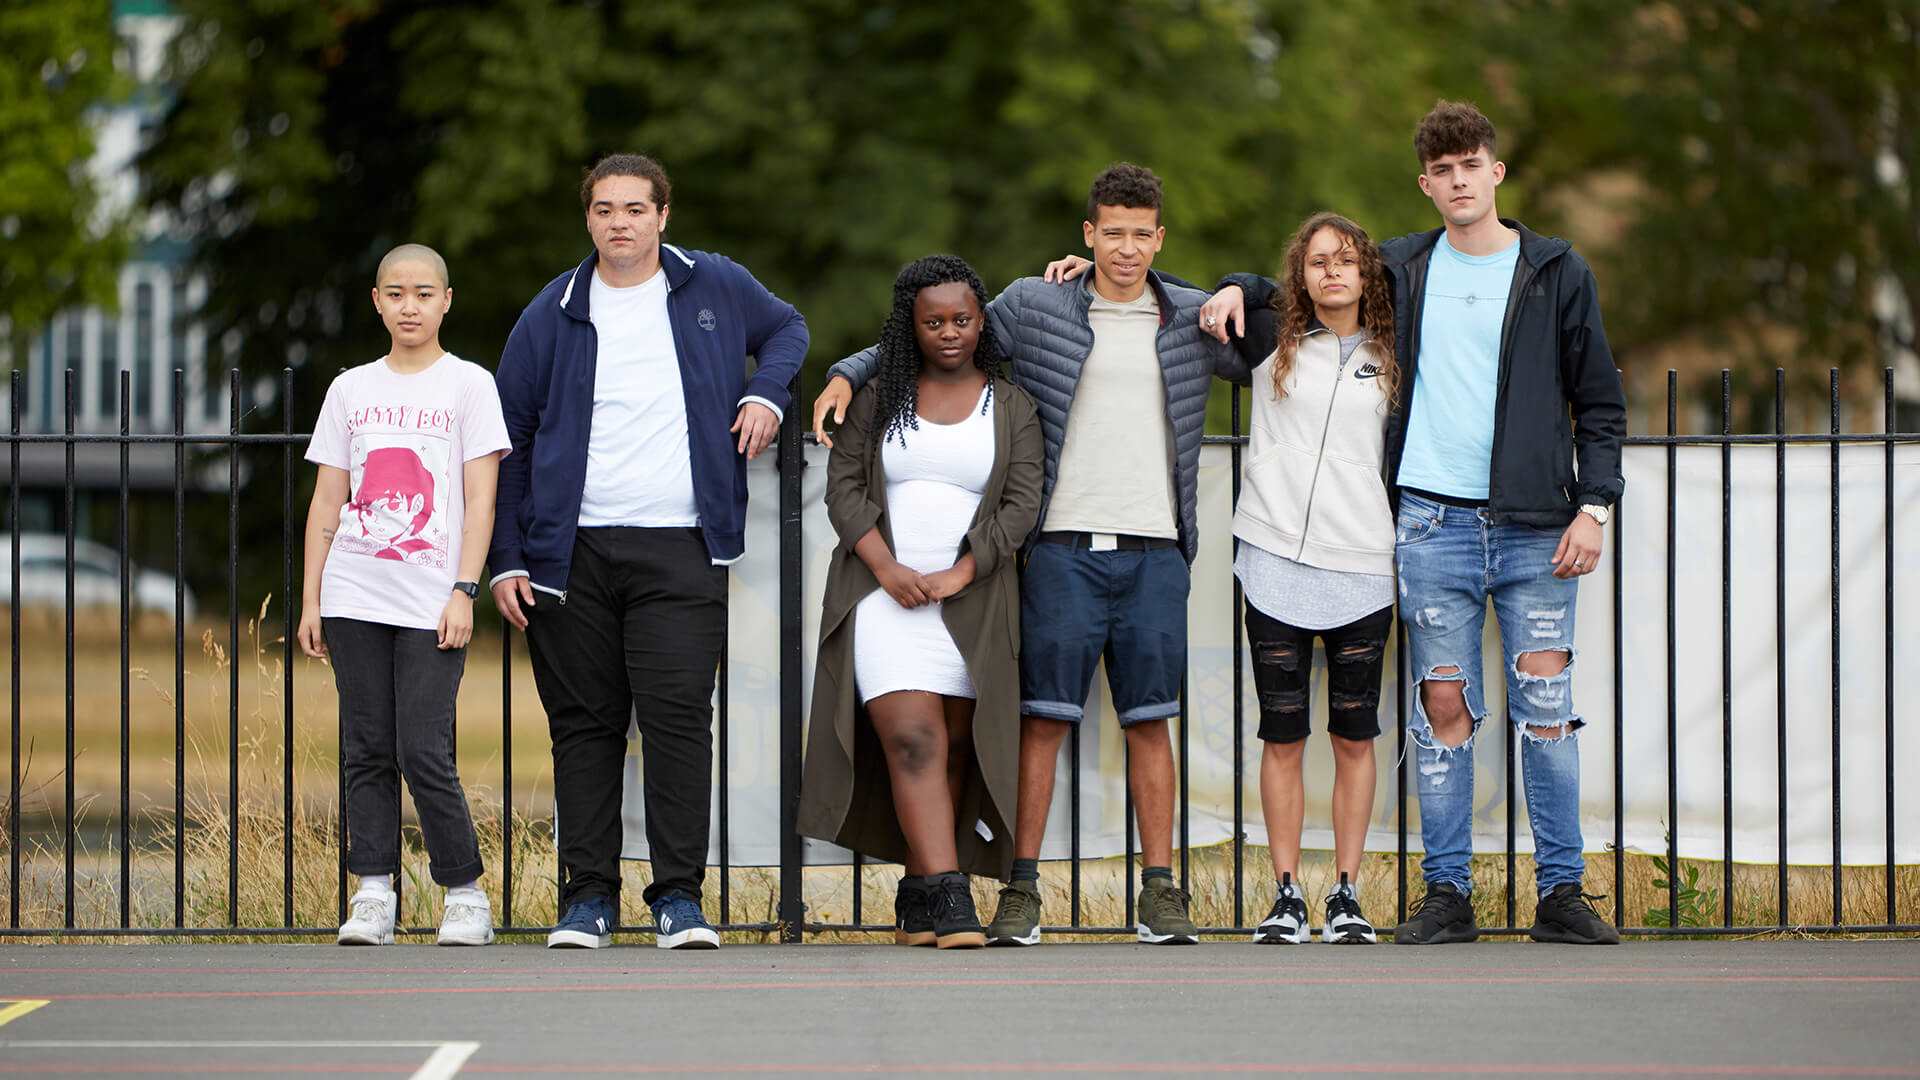 A mixed group of six young people standing in front of a black metal fence in a park playground.